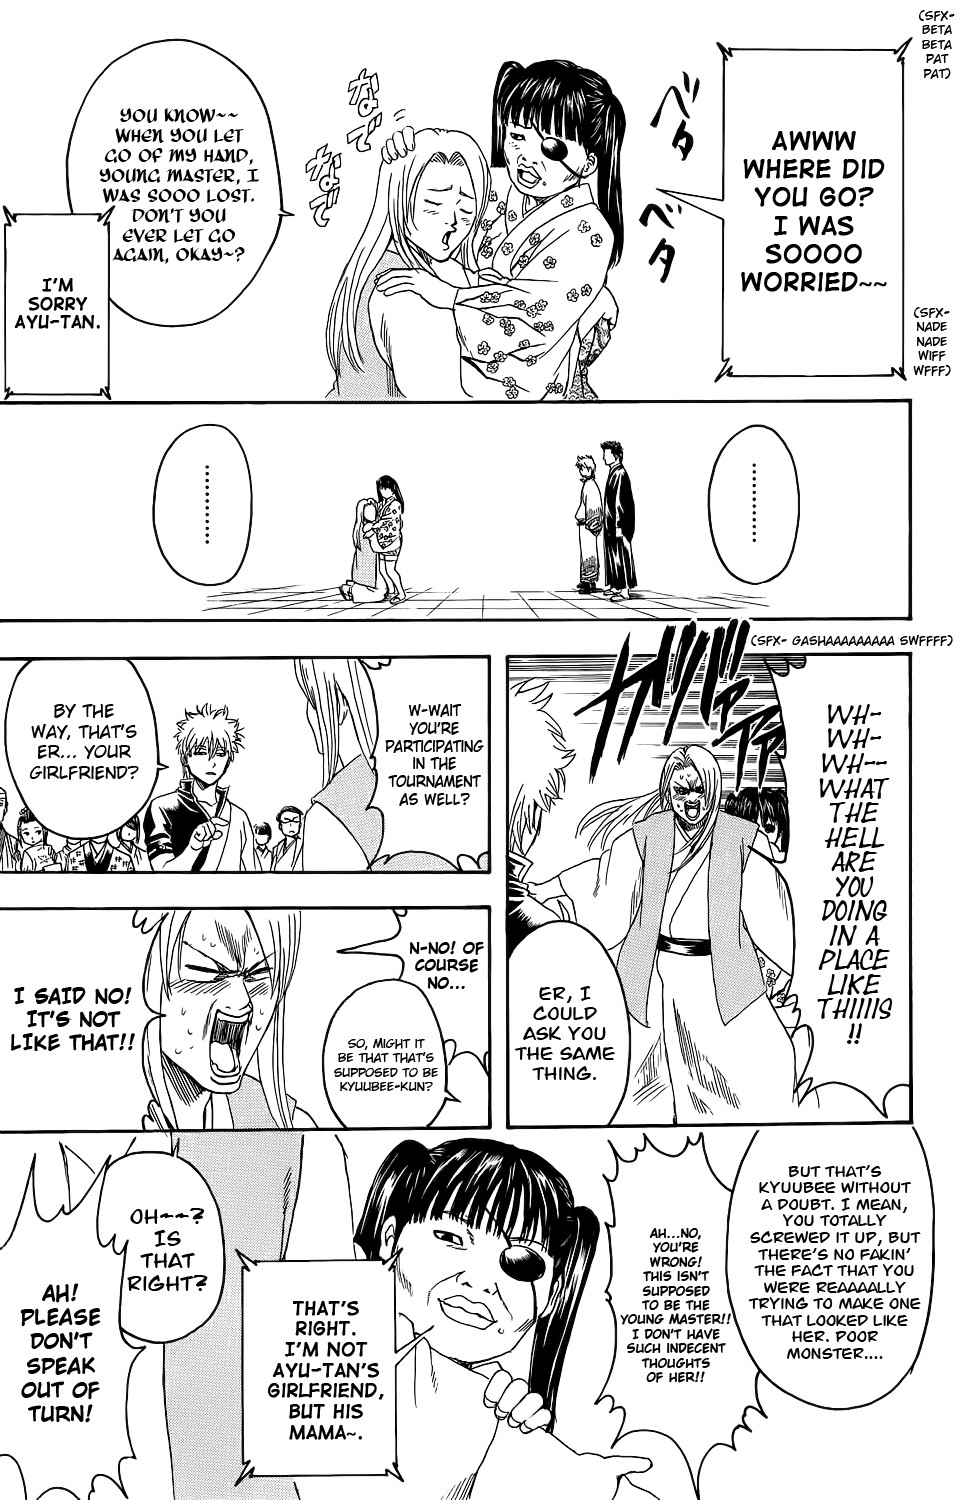 Gintama chapter 348 page 12